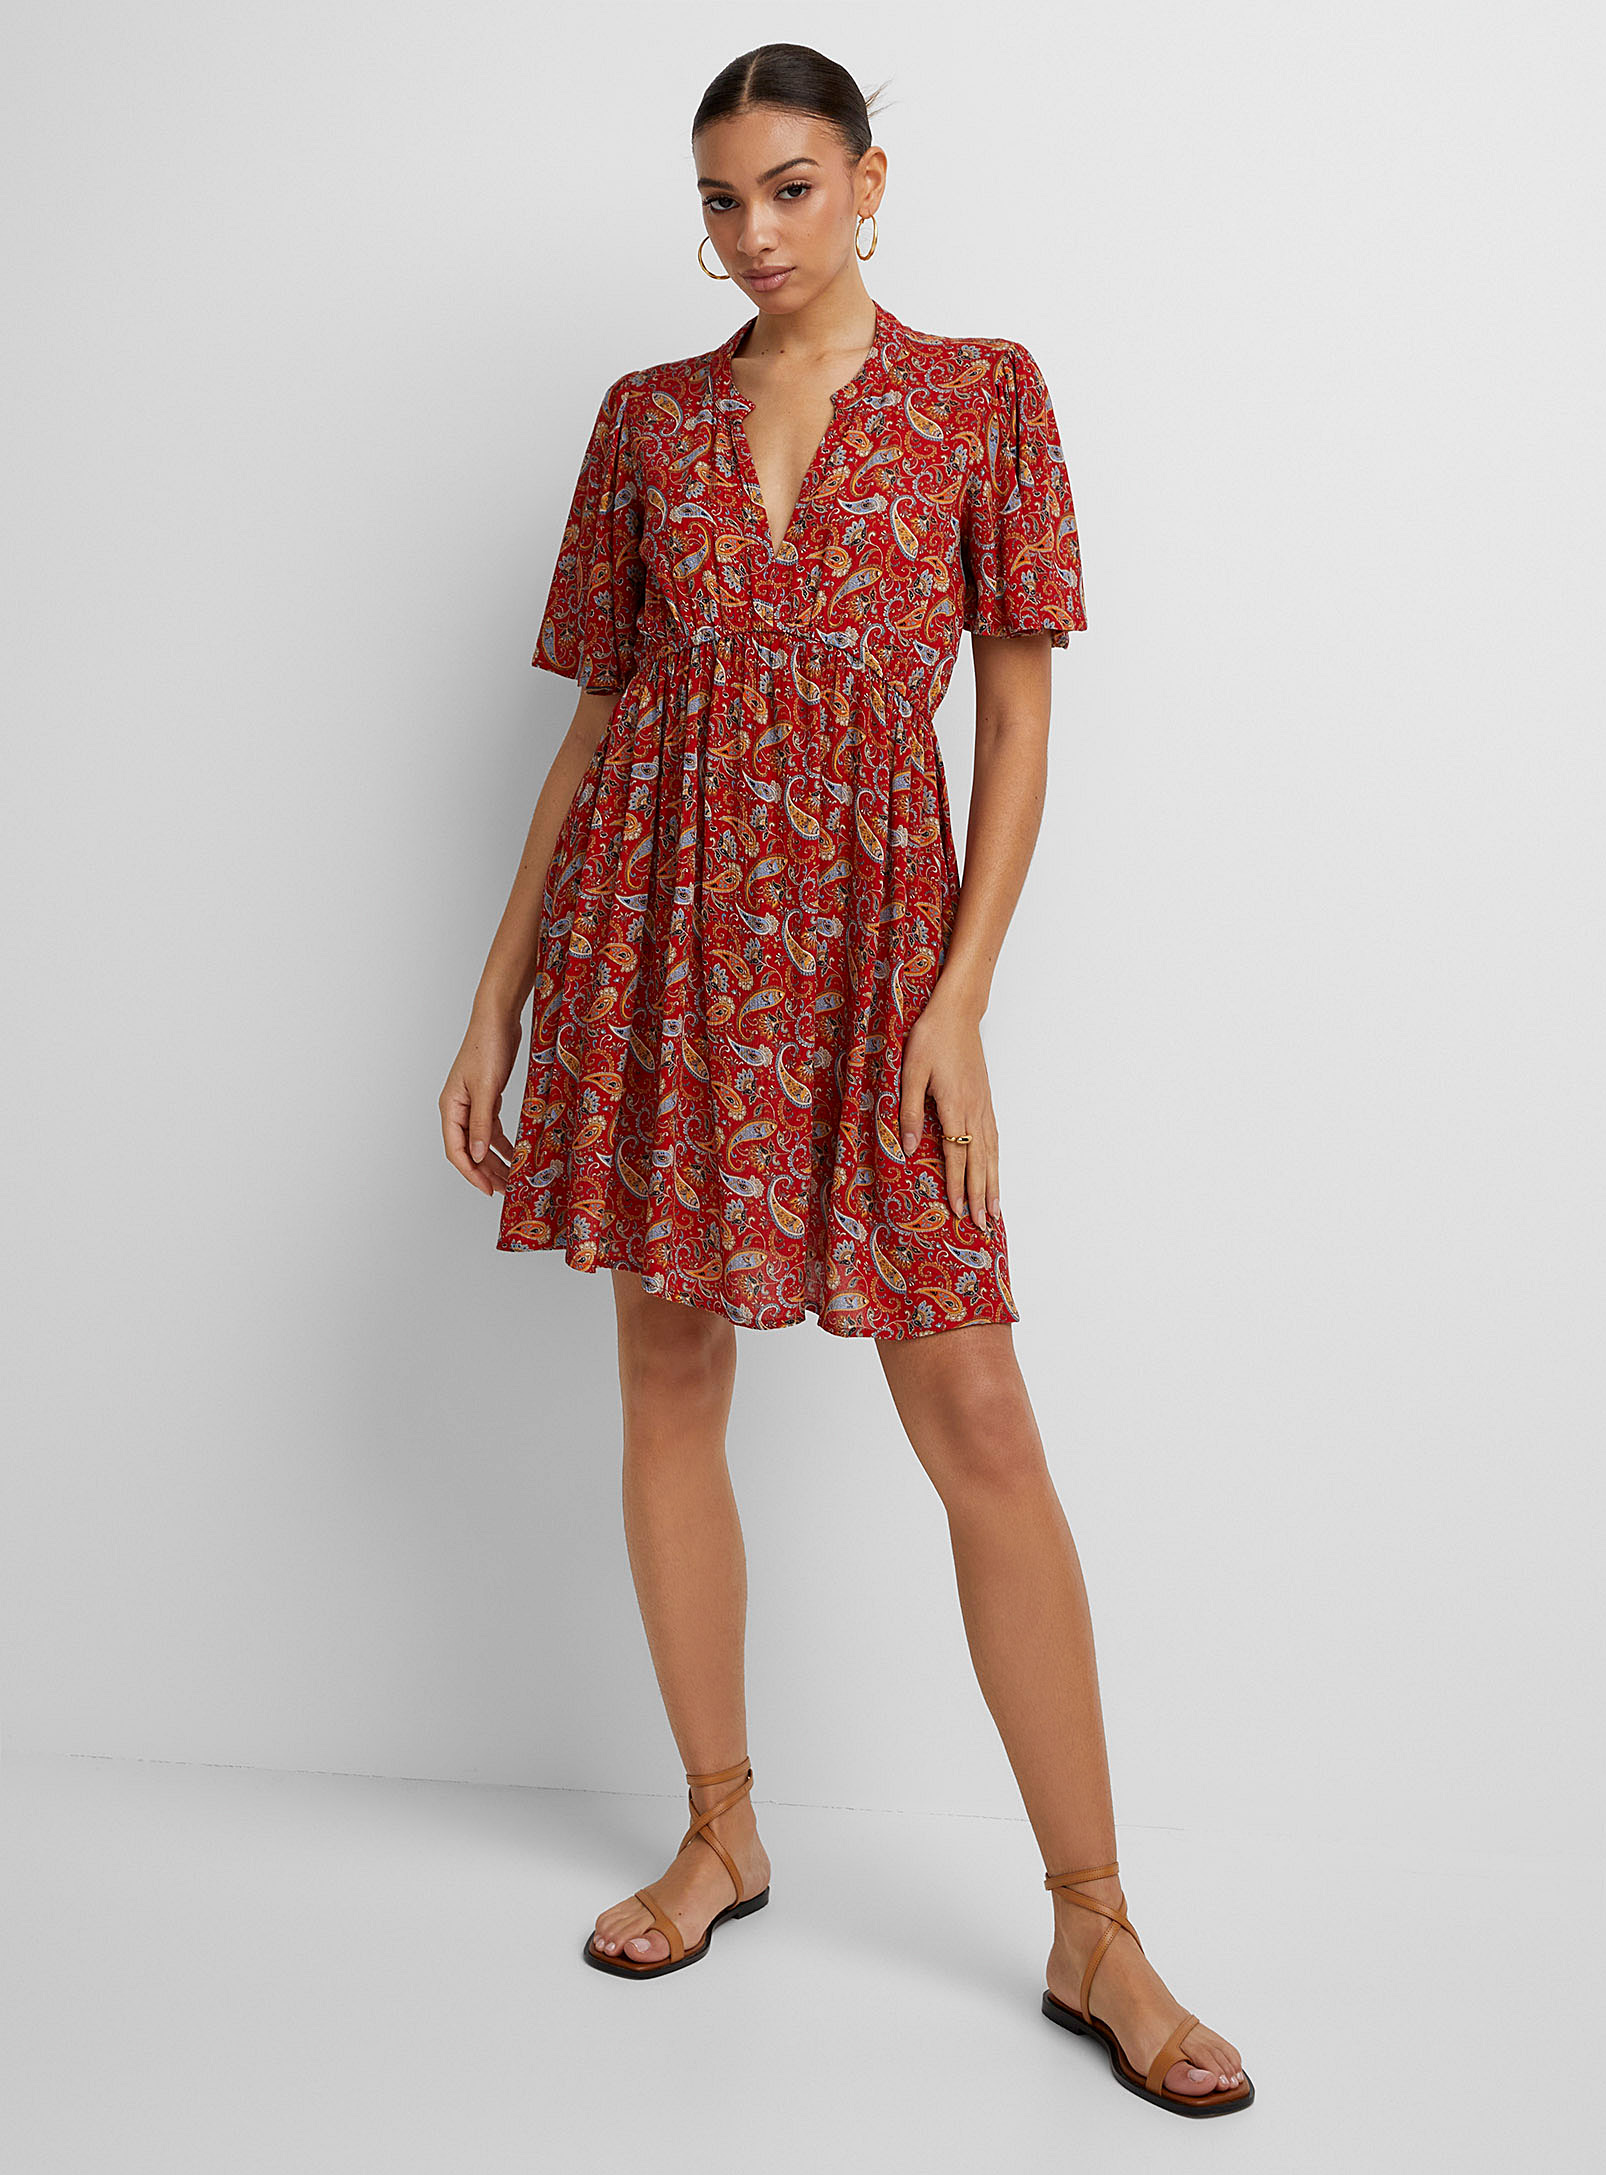 Icone Wrinkled Texture Flared Mini-dress In Patterned Red